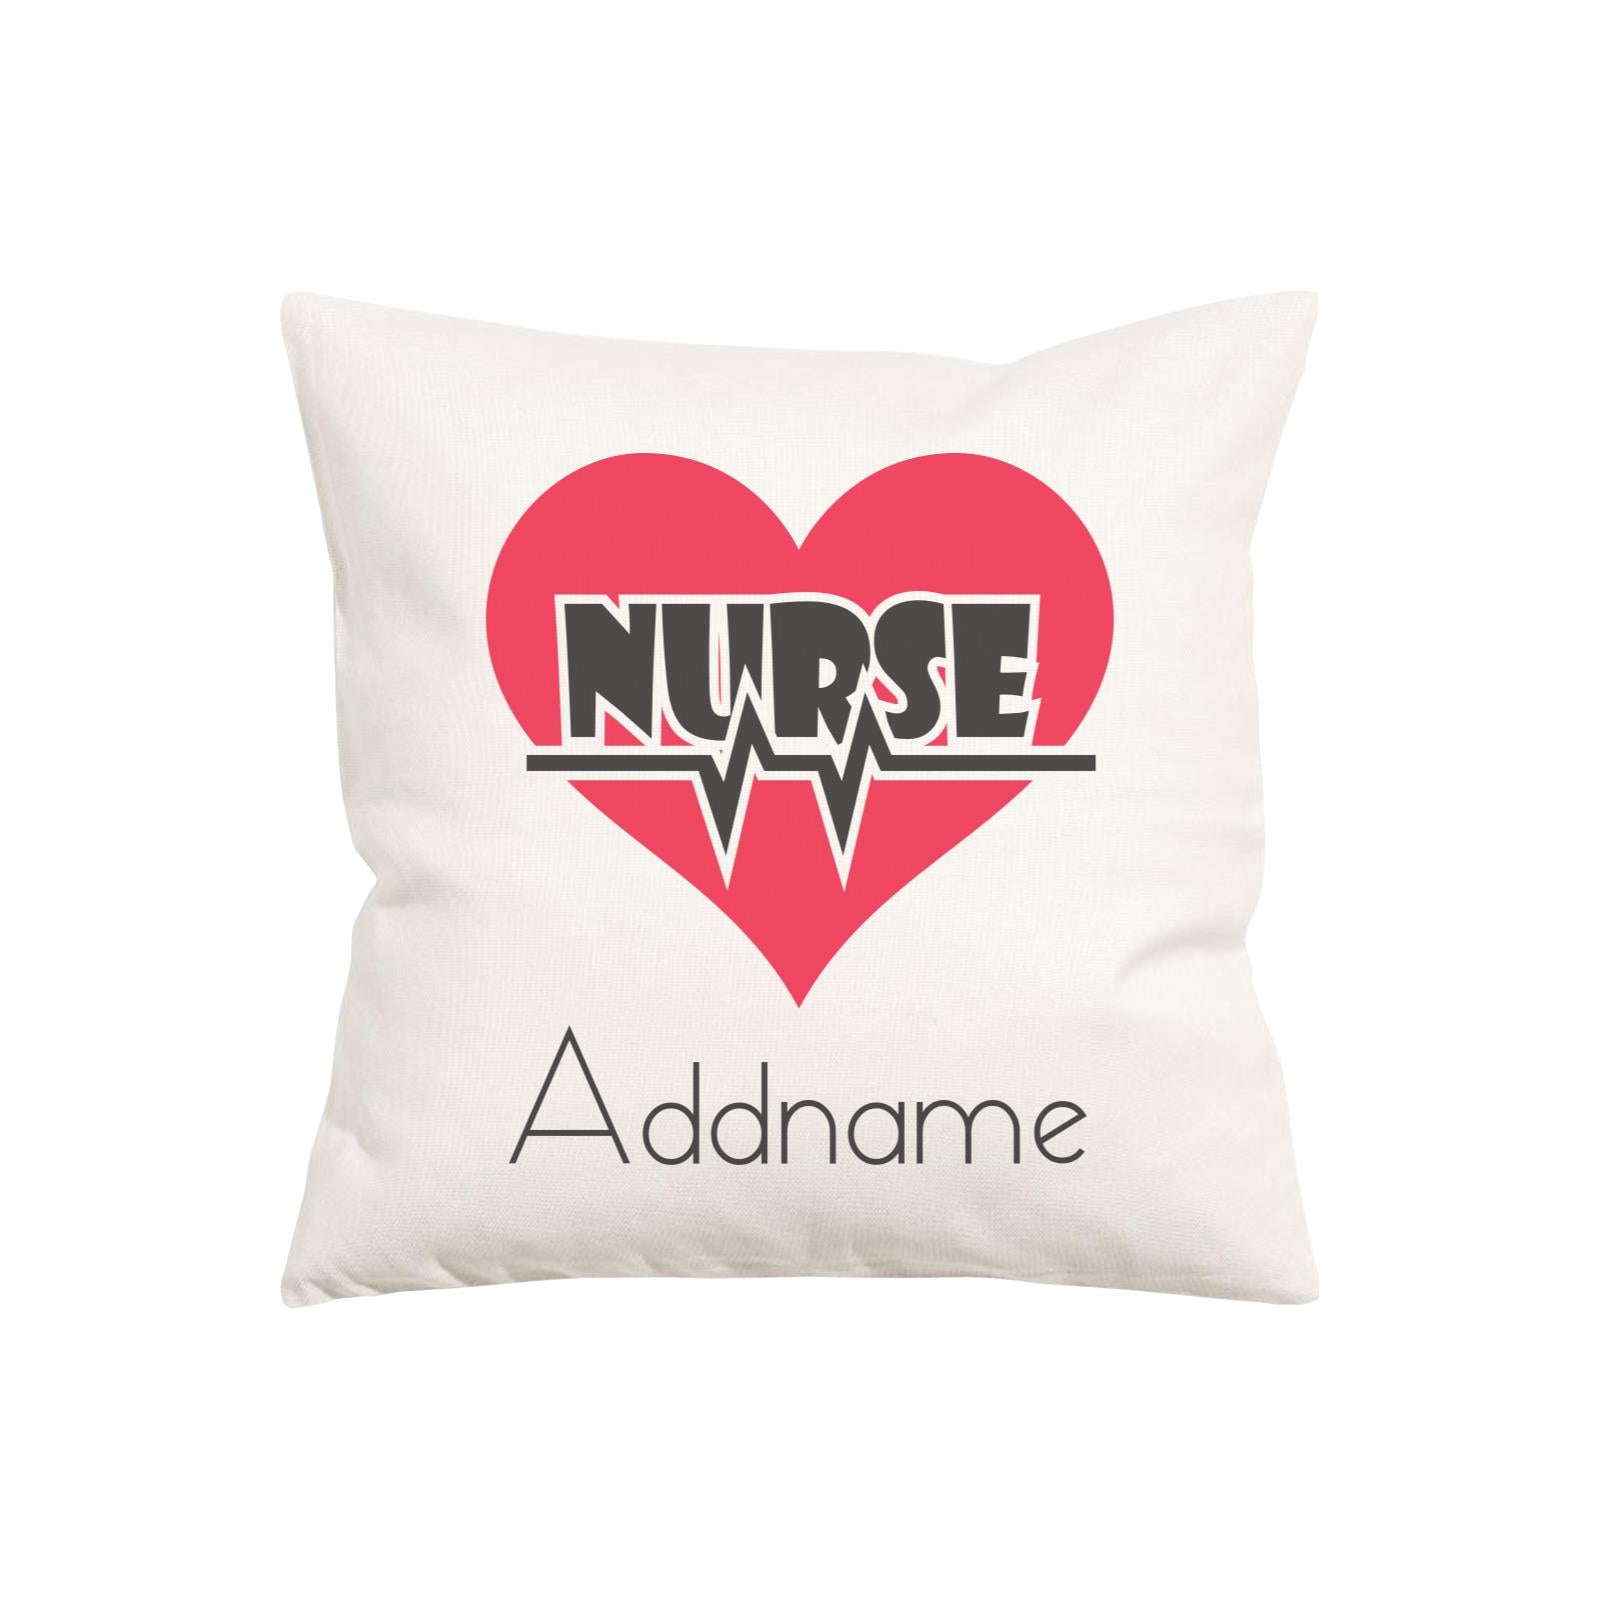 Nurse with Pink Heart Pillow Cushion